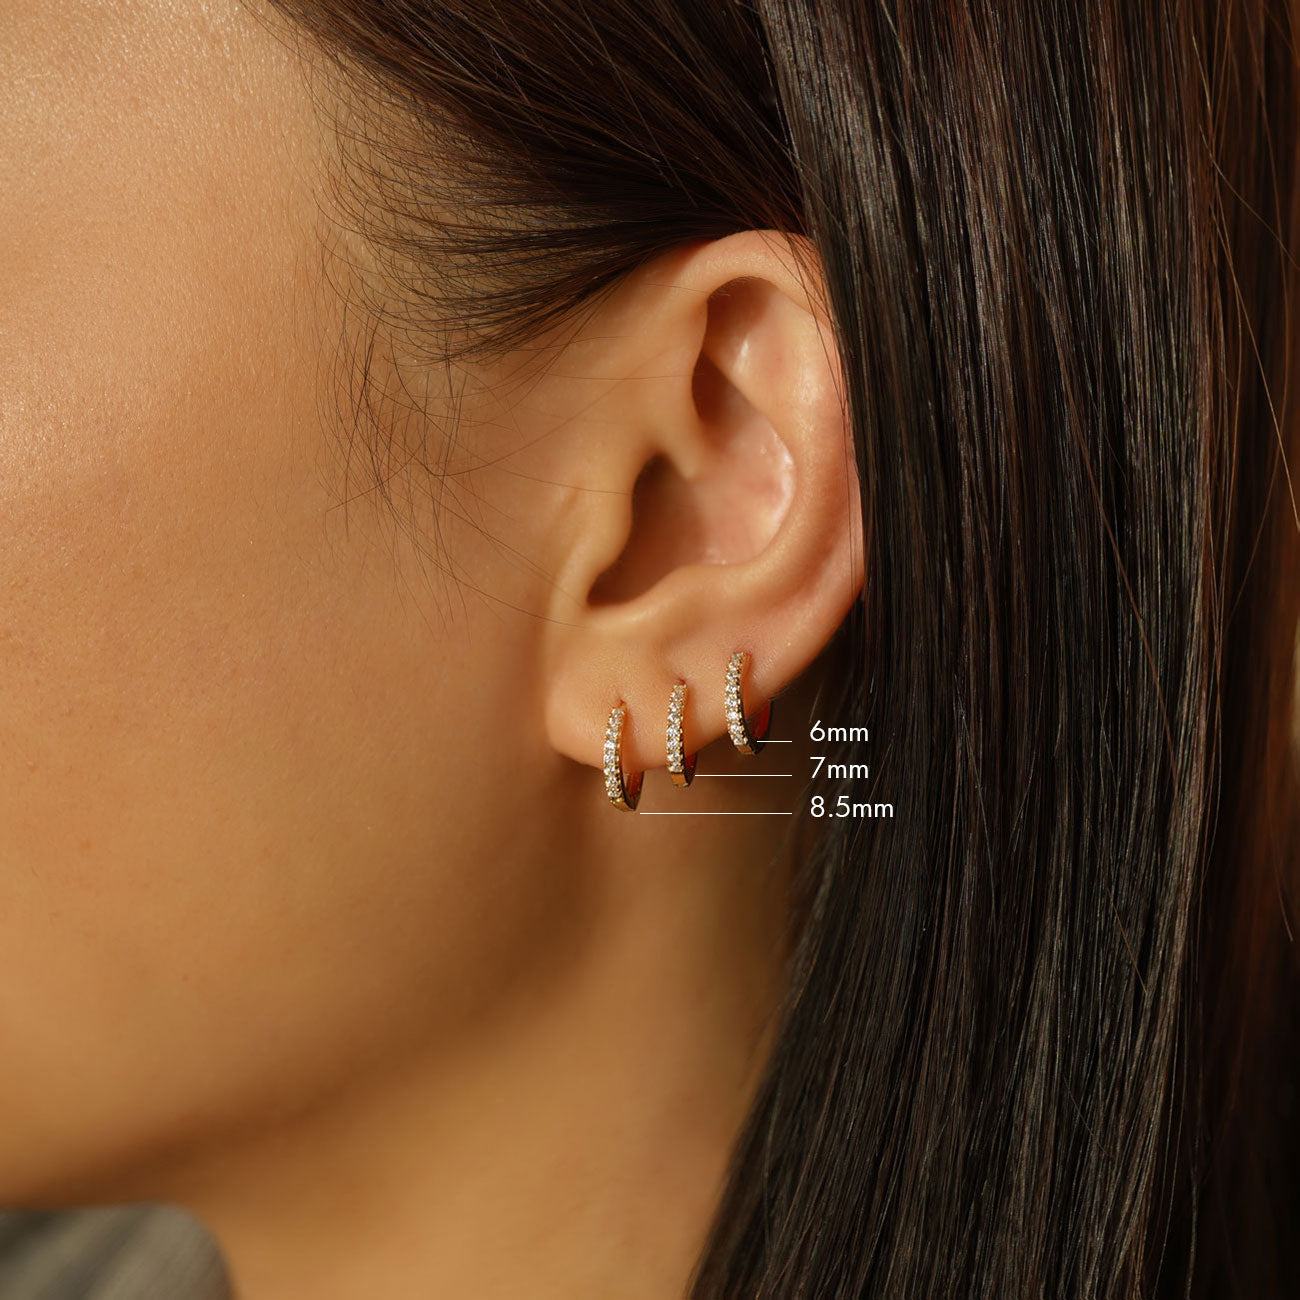 caption: Model's first hole length: 6.2mm, second hole: 4.6mm, third hole: 3.6mm